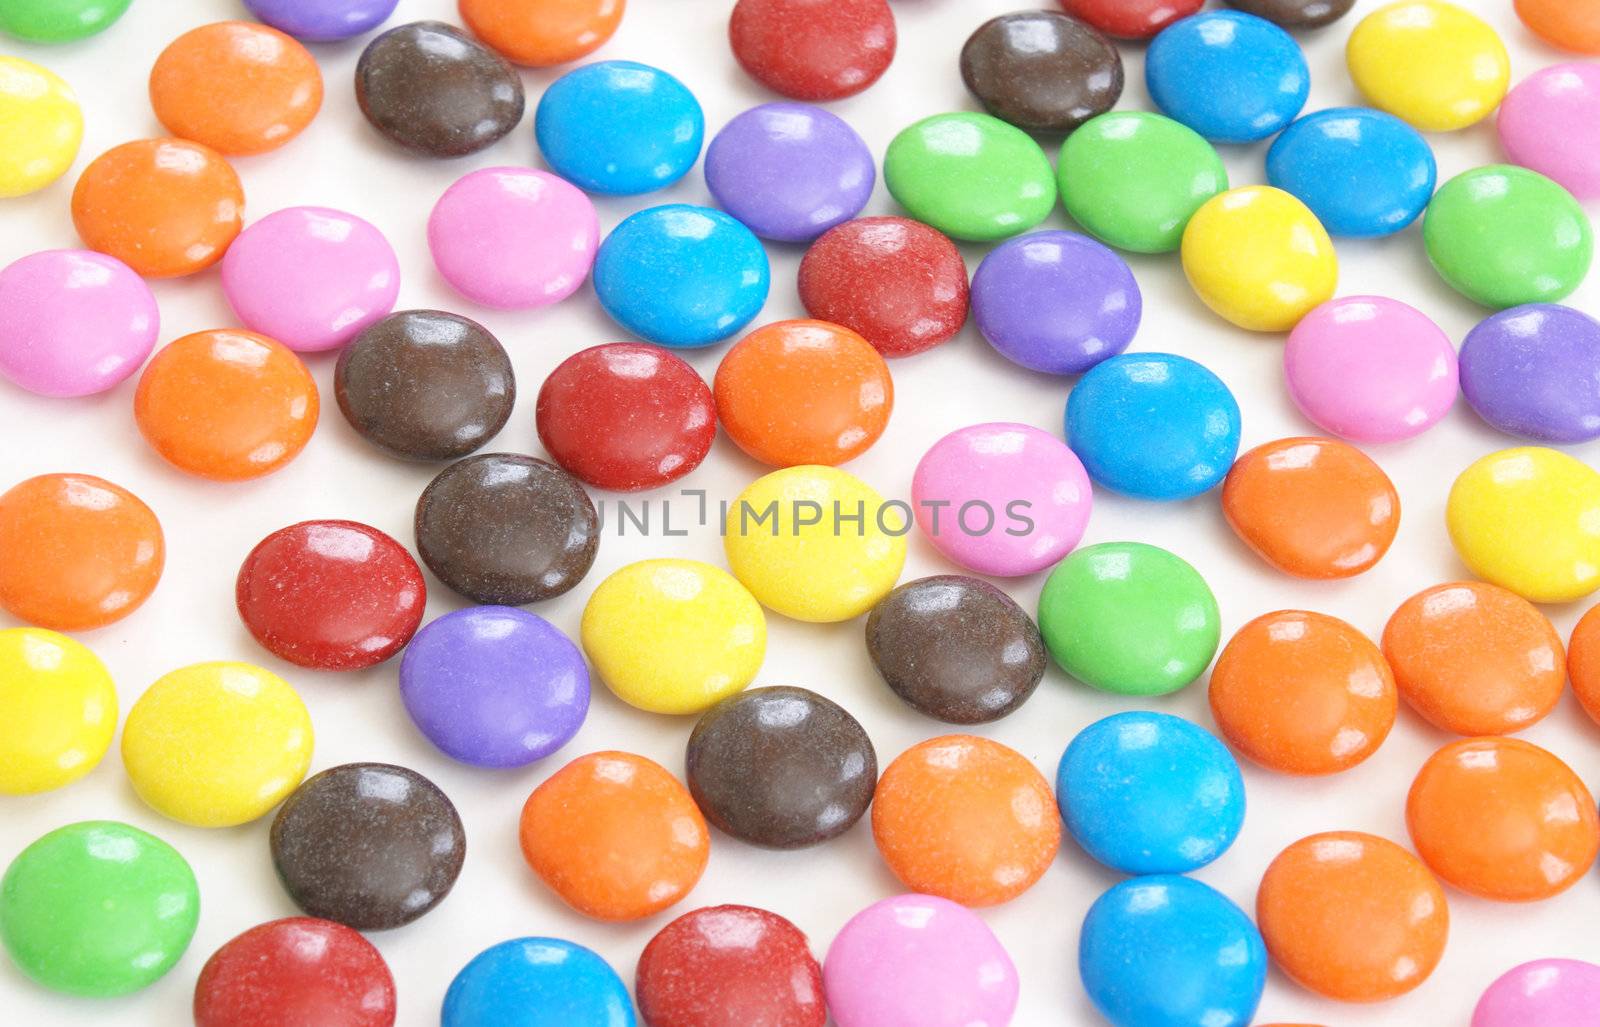 A macro of a colorful display of coated candy.